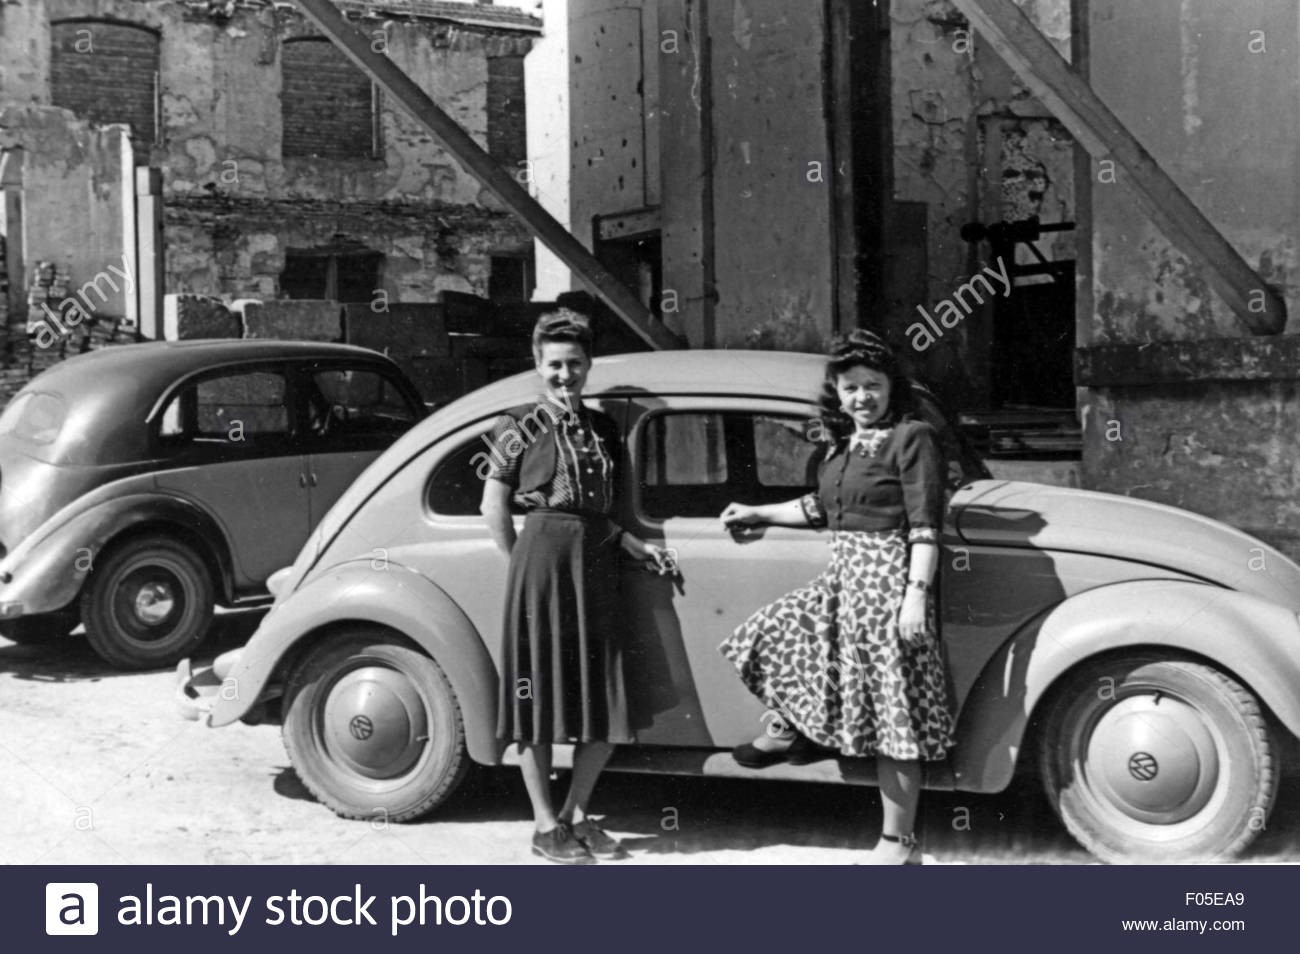 Leisure time excursion. Two women in front of VW Beetle having a break on a roadtrip in 1950s.